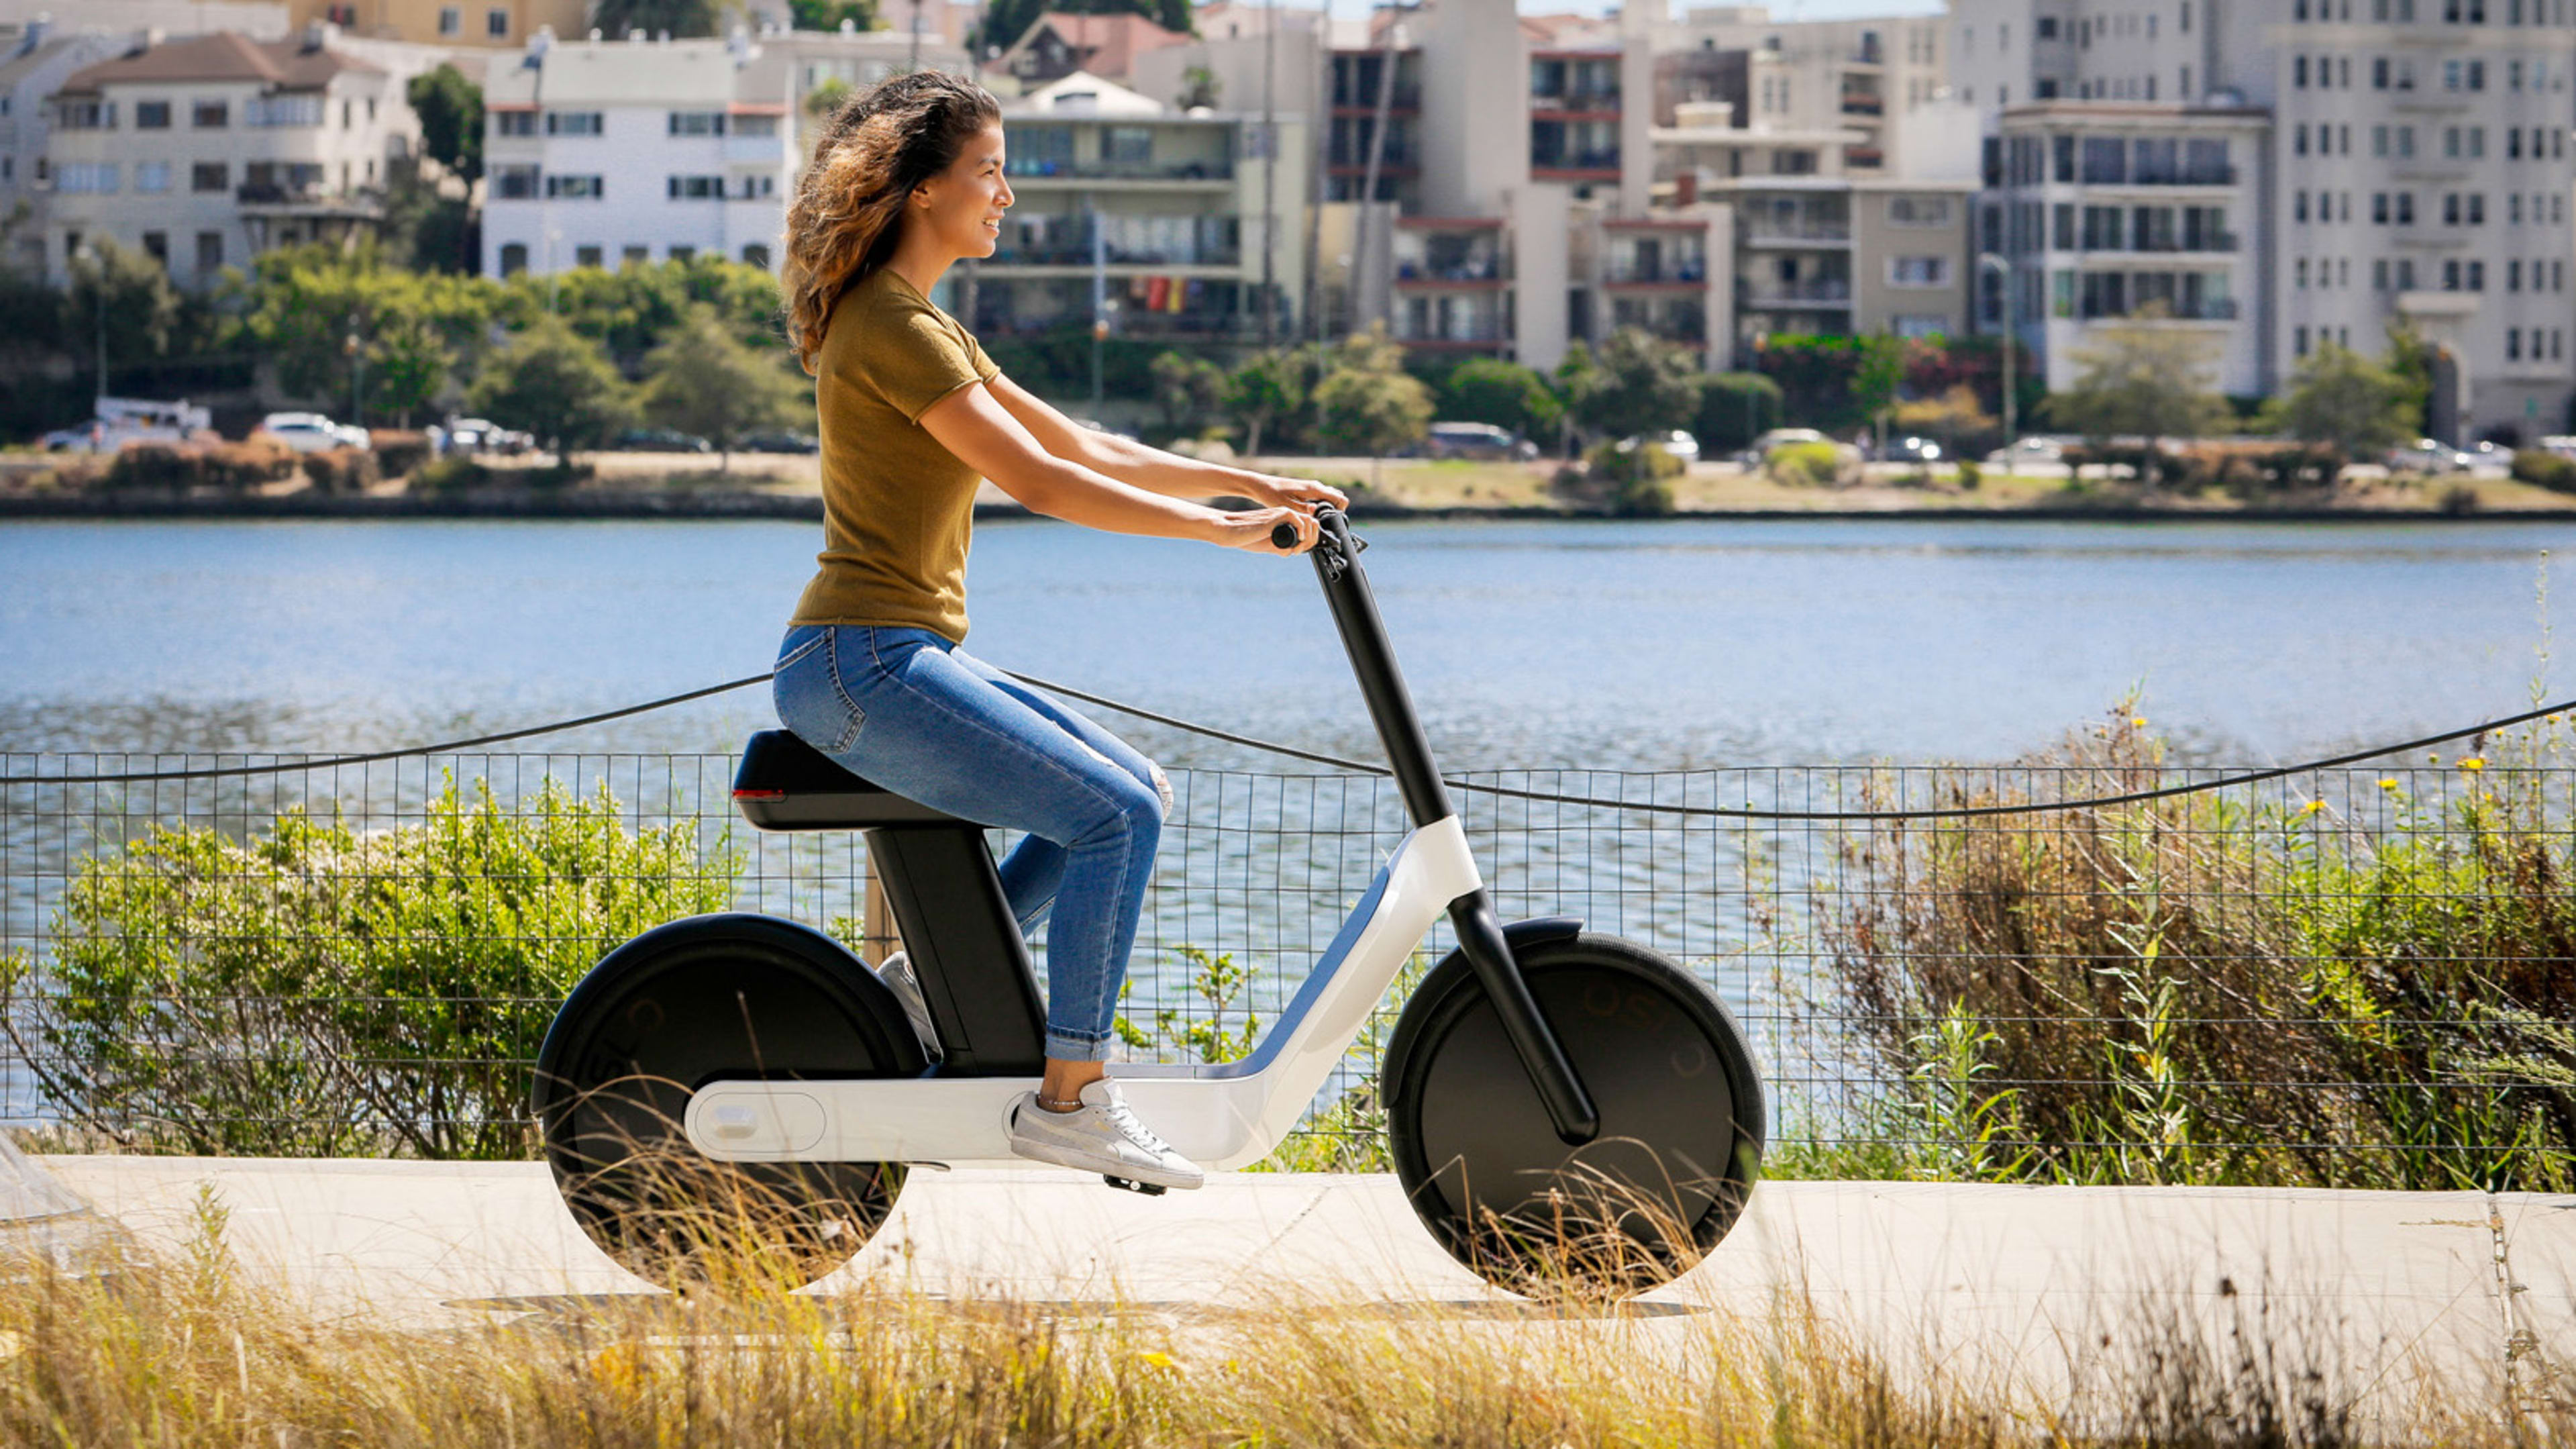 Could this half-bike, half-scooter create a new form of urban transit?